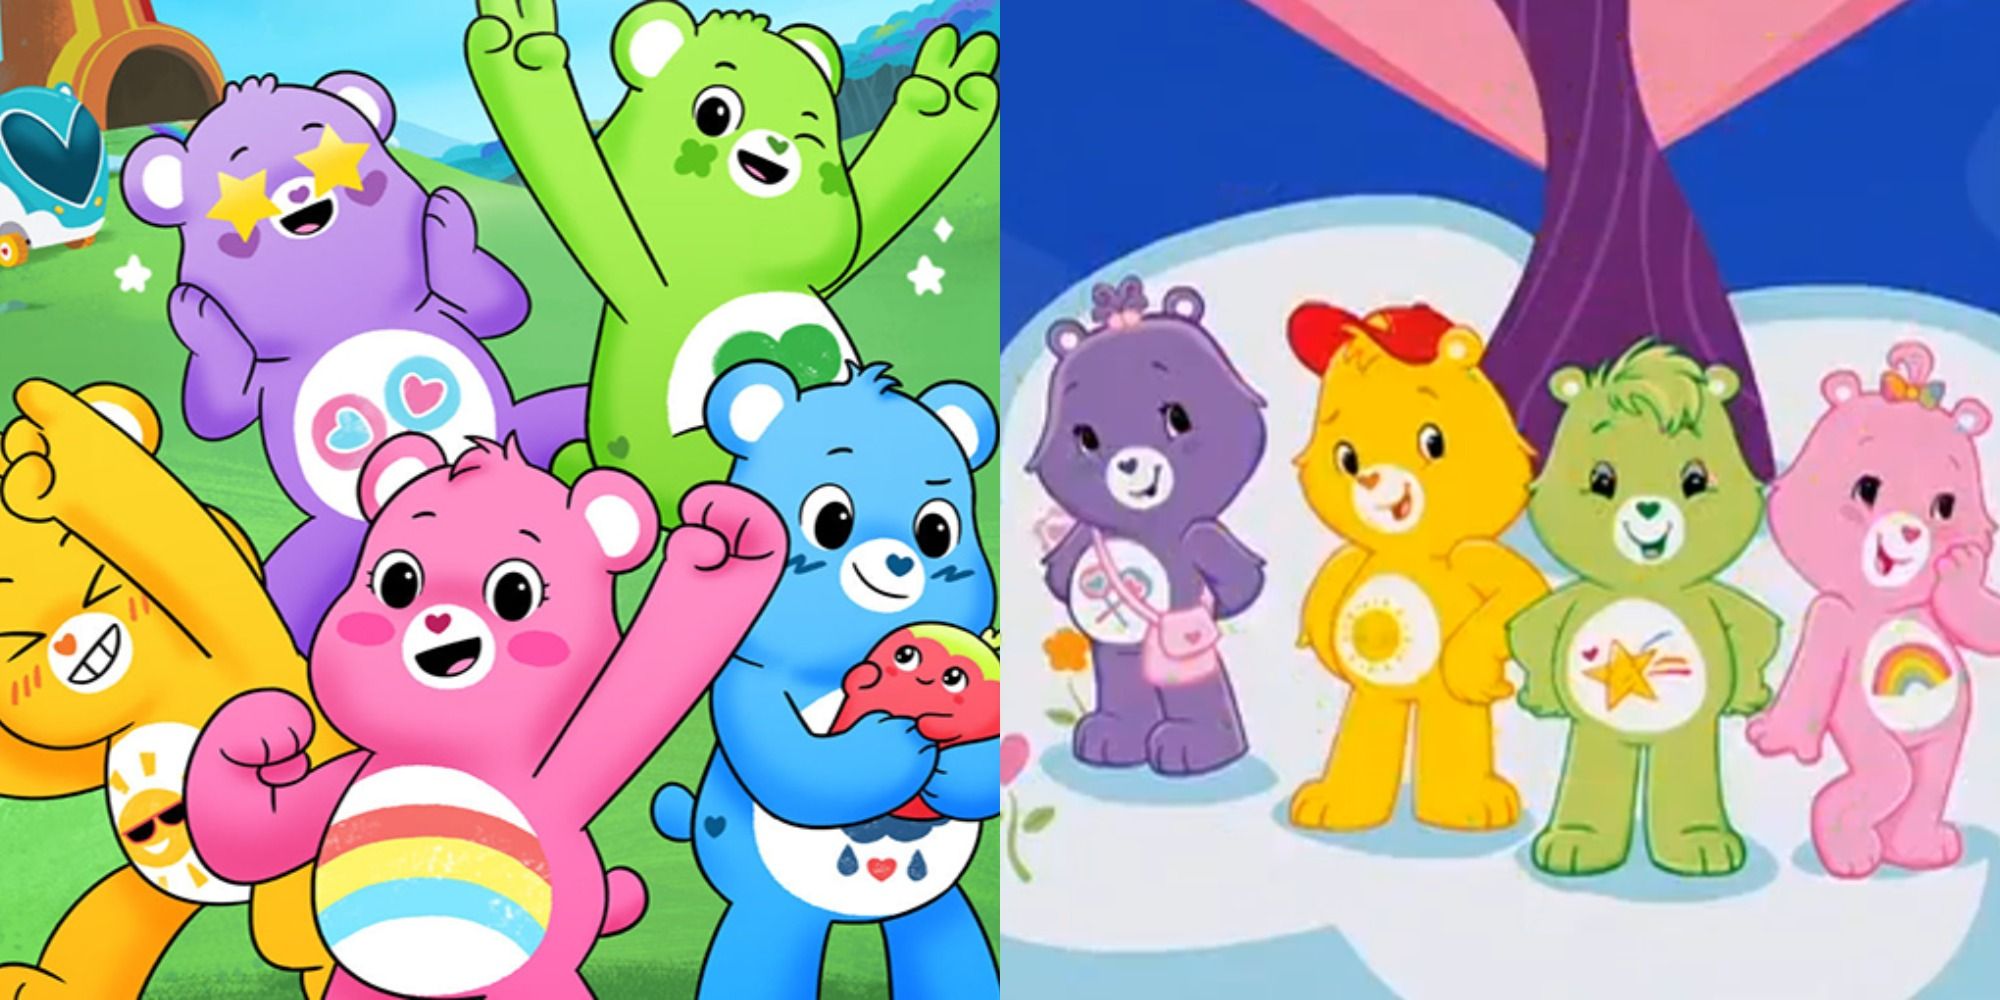 Split image of Care Bears from Care Bears Unlock The Magic and the 90s cartoon